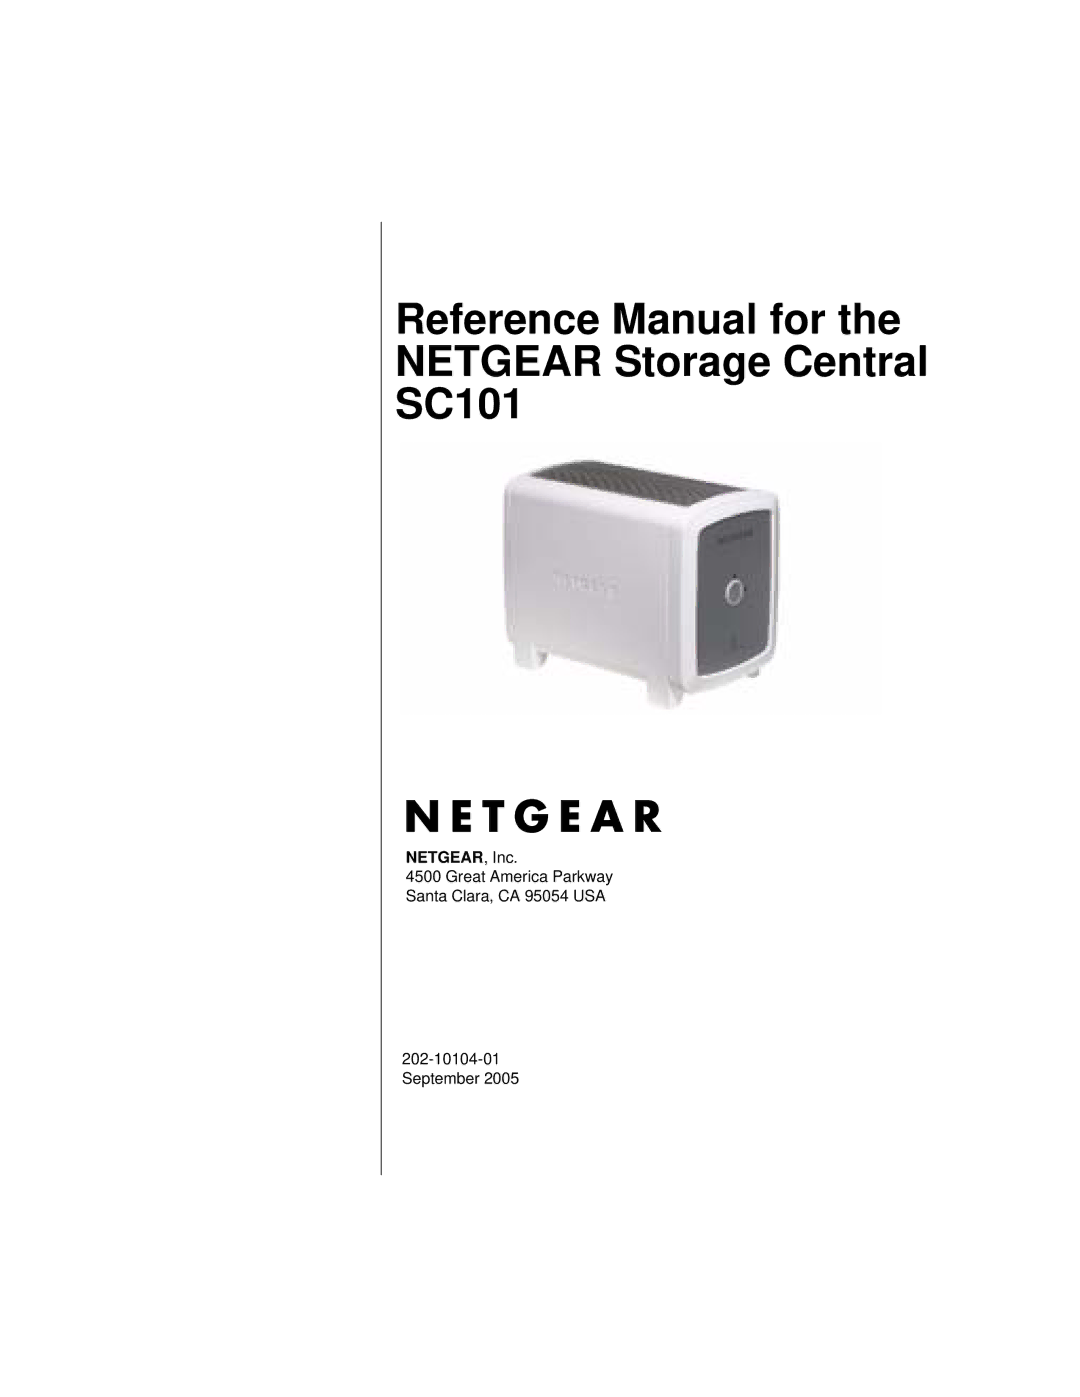 NETGEAR manual Reference Manual for the Netgear Storage Central SC101 